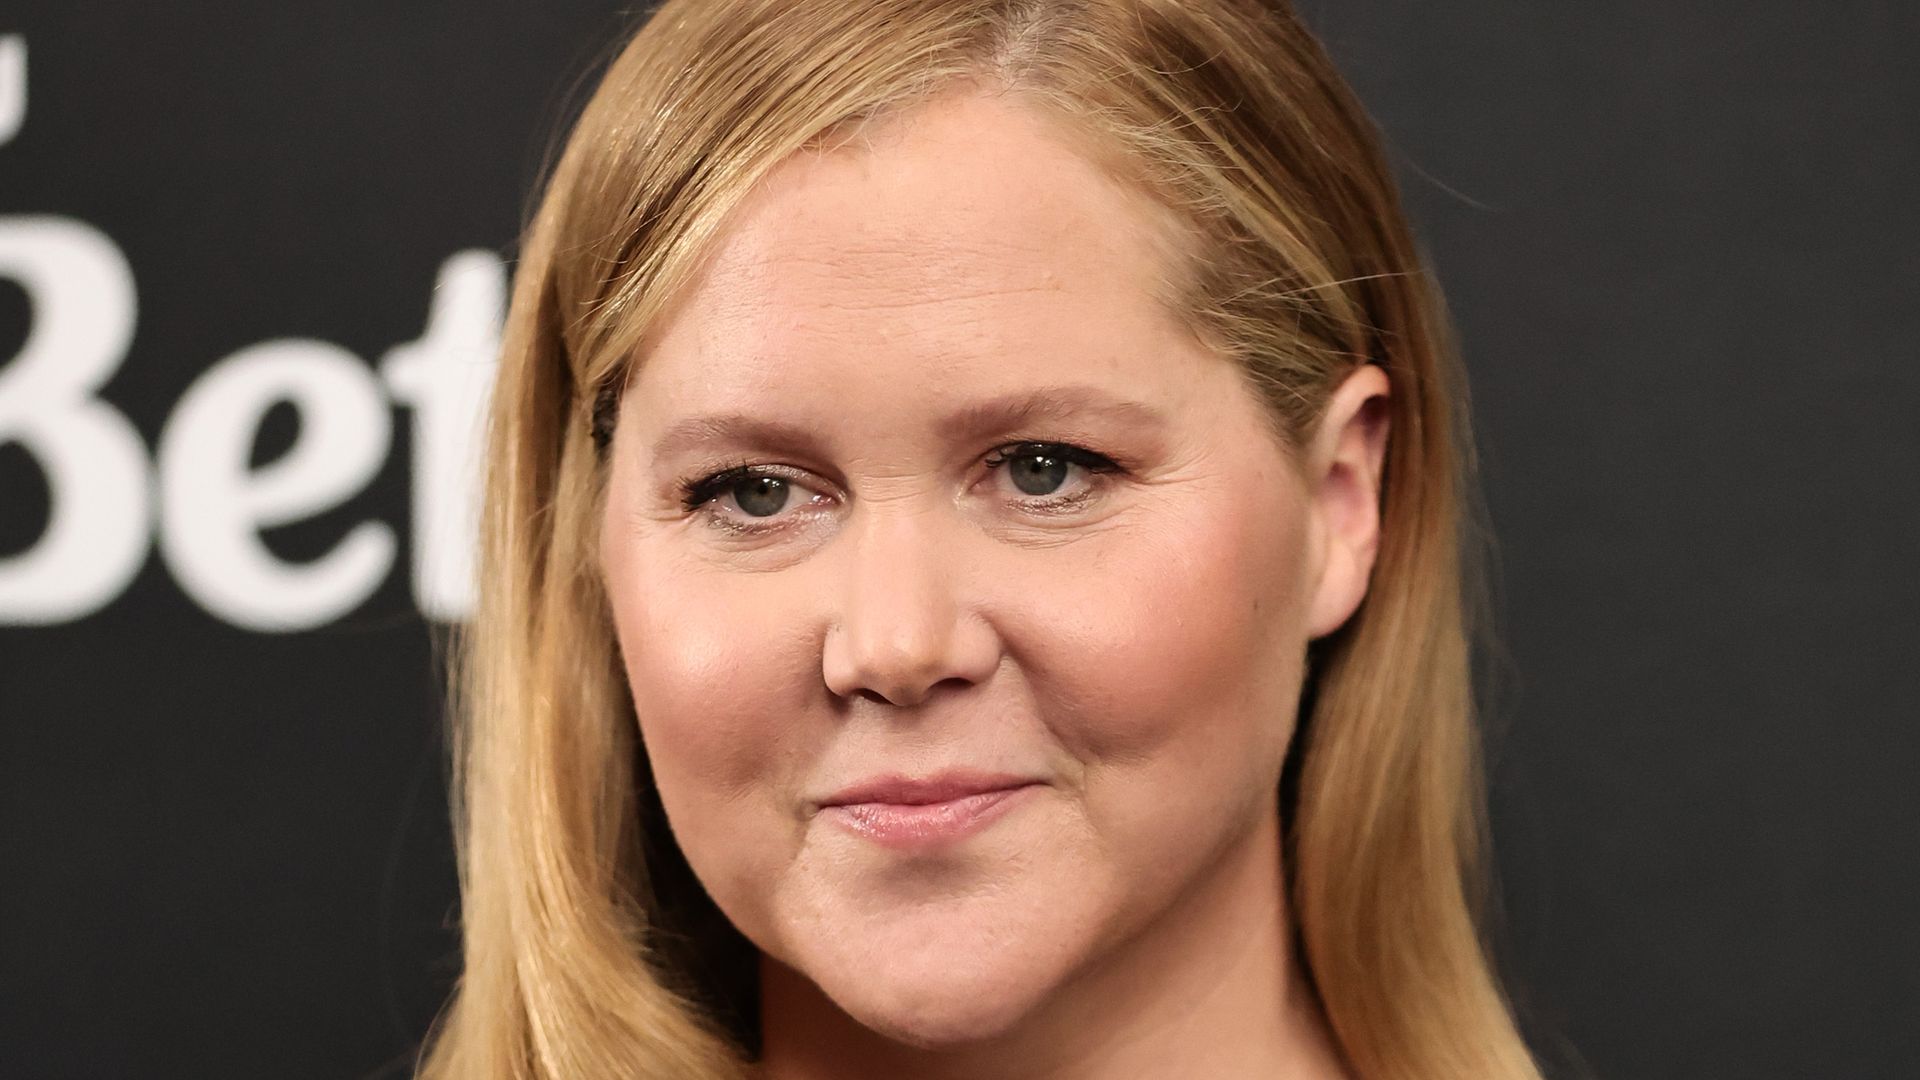 Amy Schumer attending a premiere